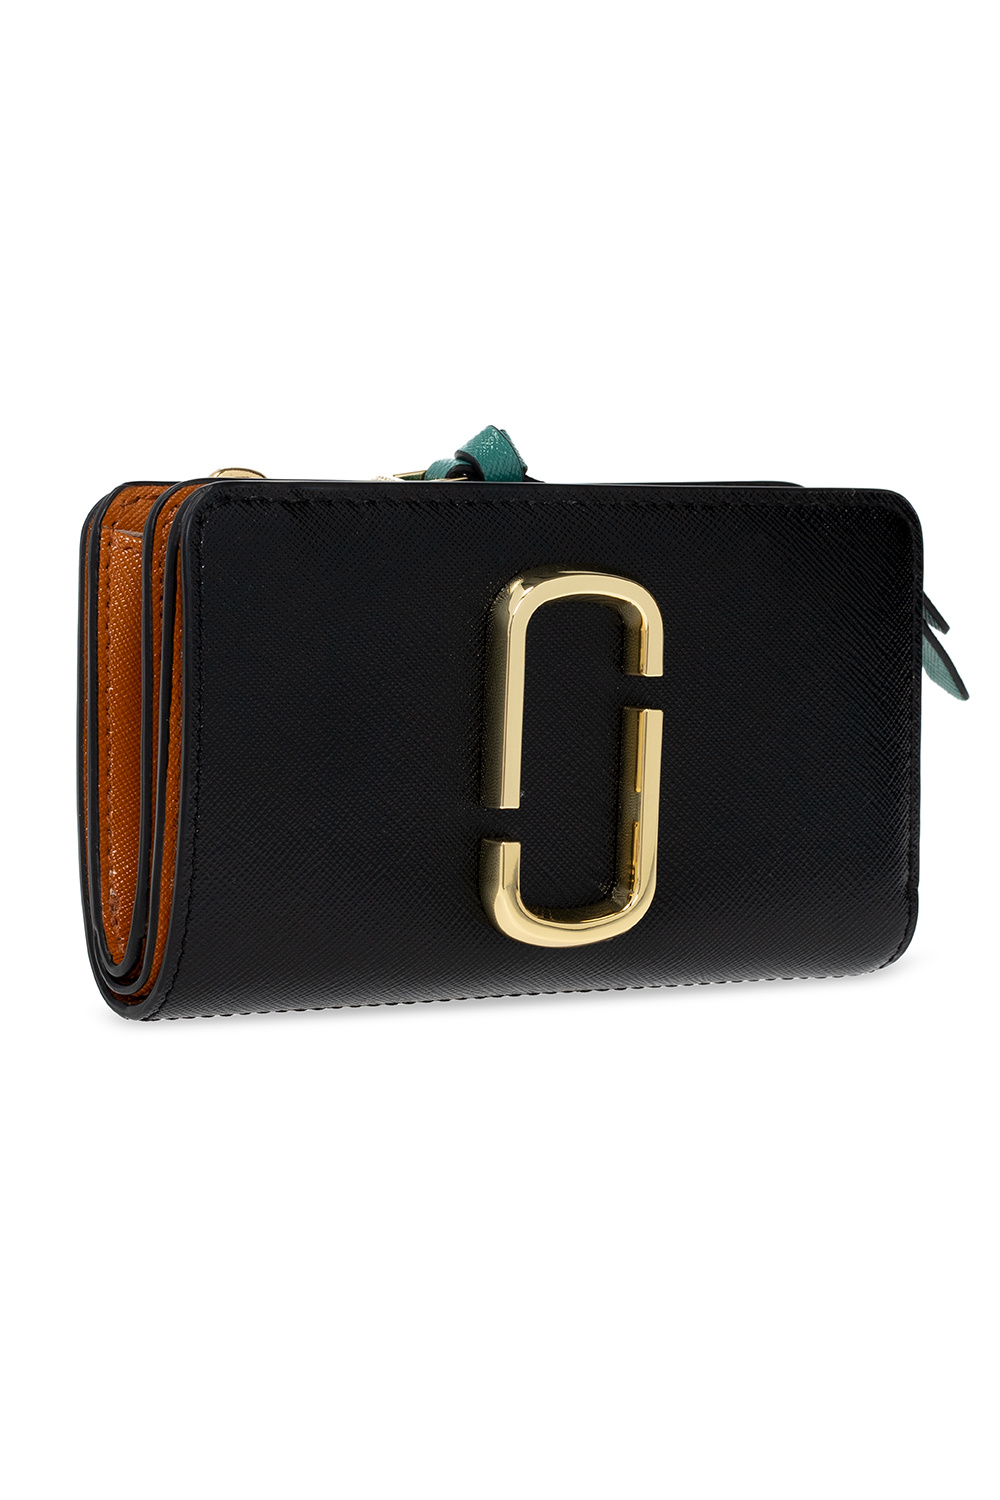 Marc Jacobs (The) Marc Jacobs small flap cardholder